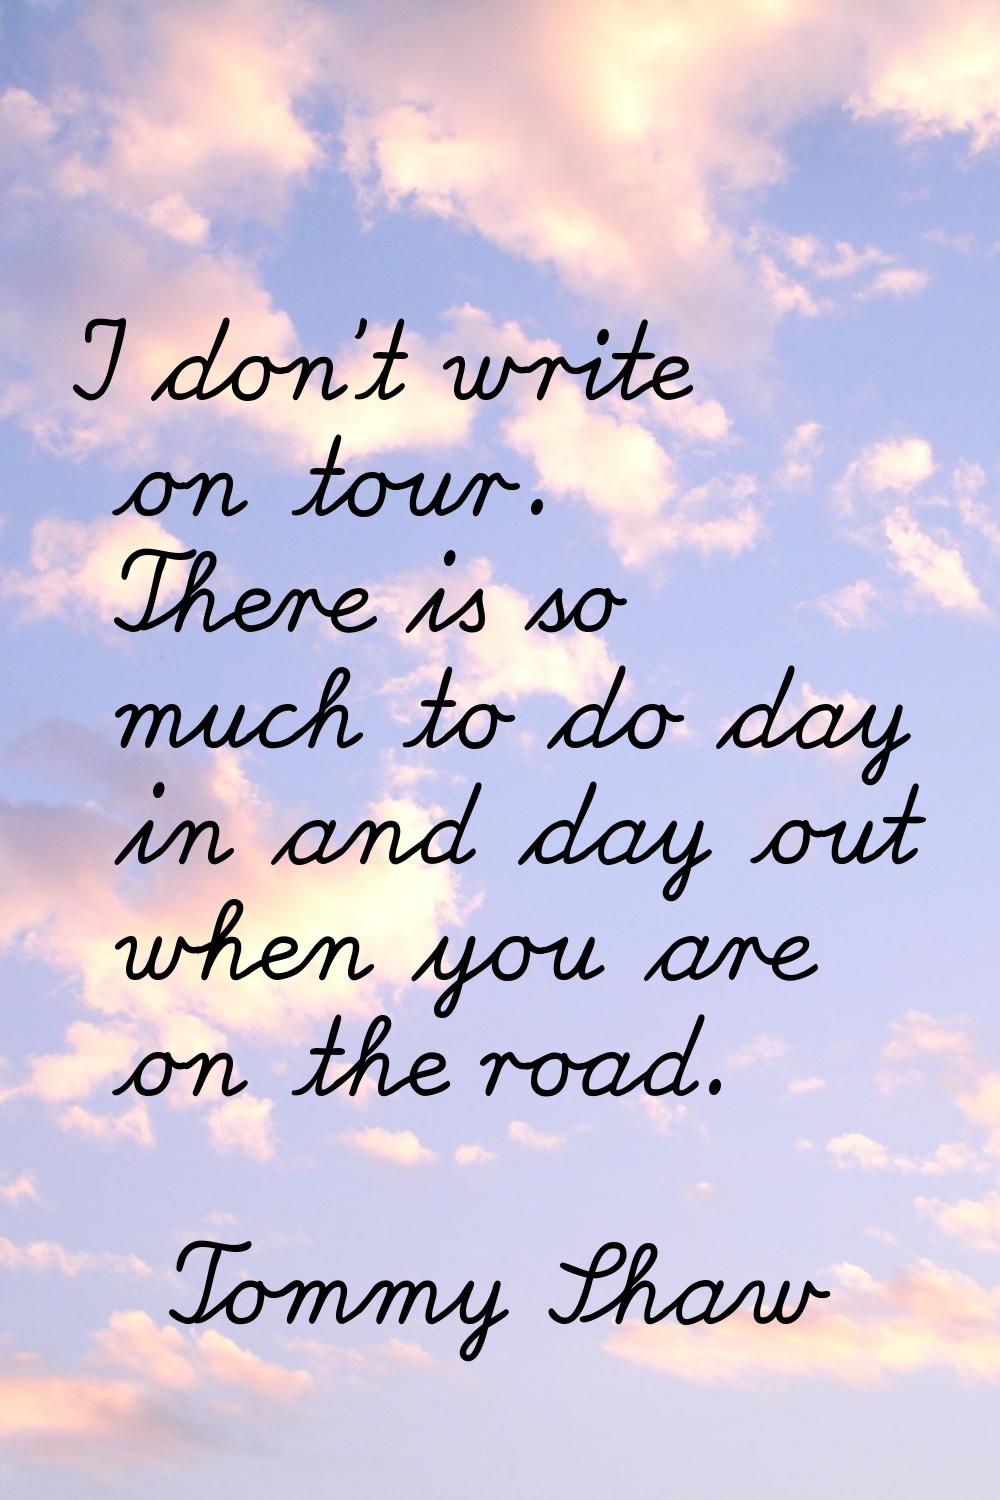 I don't write on tour. There is so much to do day in and day out when you are on the road.